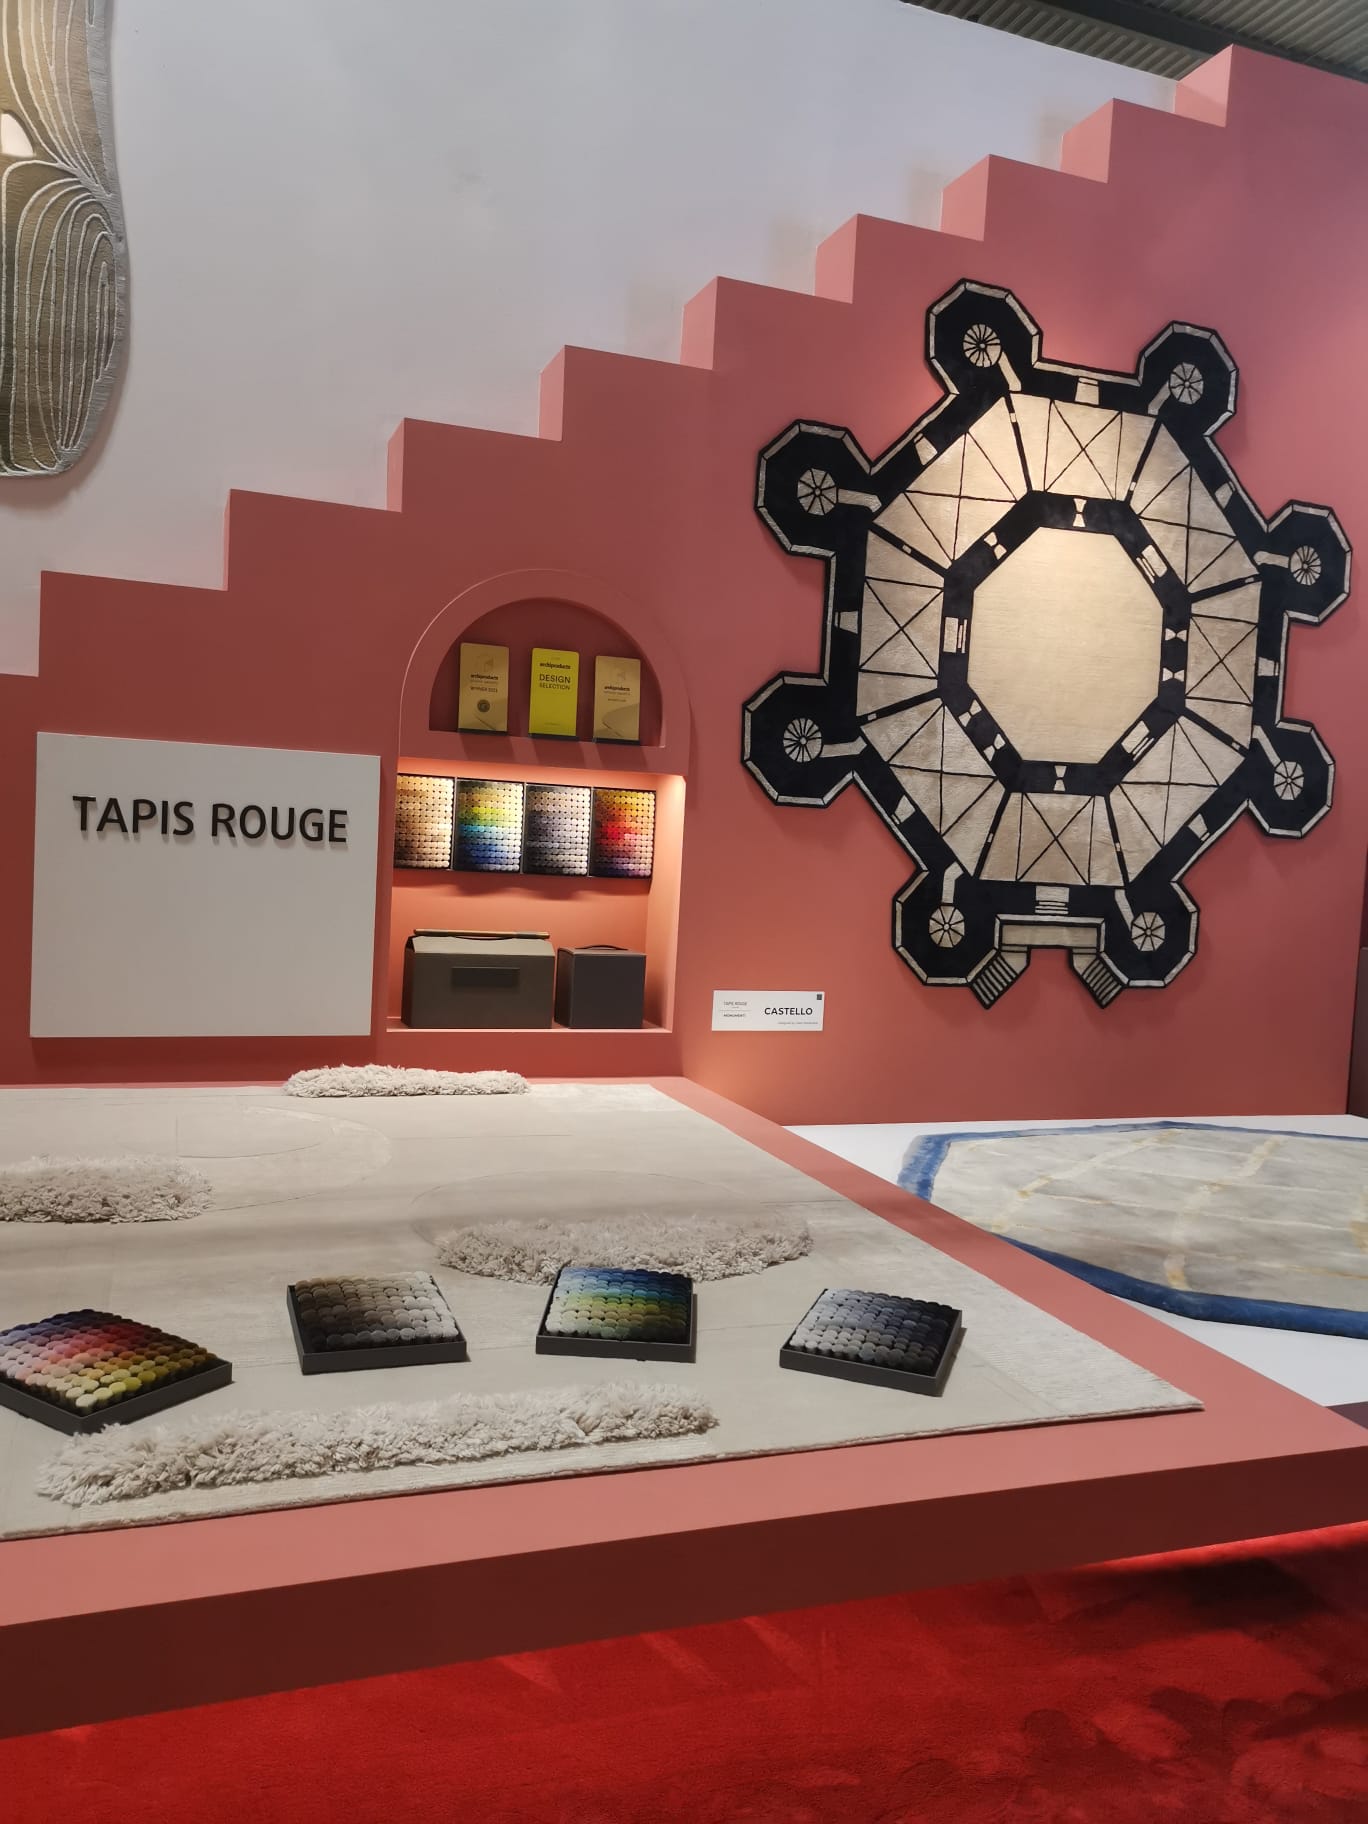 iSaloni Fair: How art and design come together at iSaloni